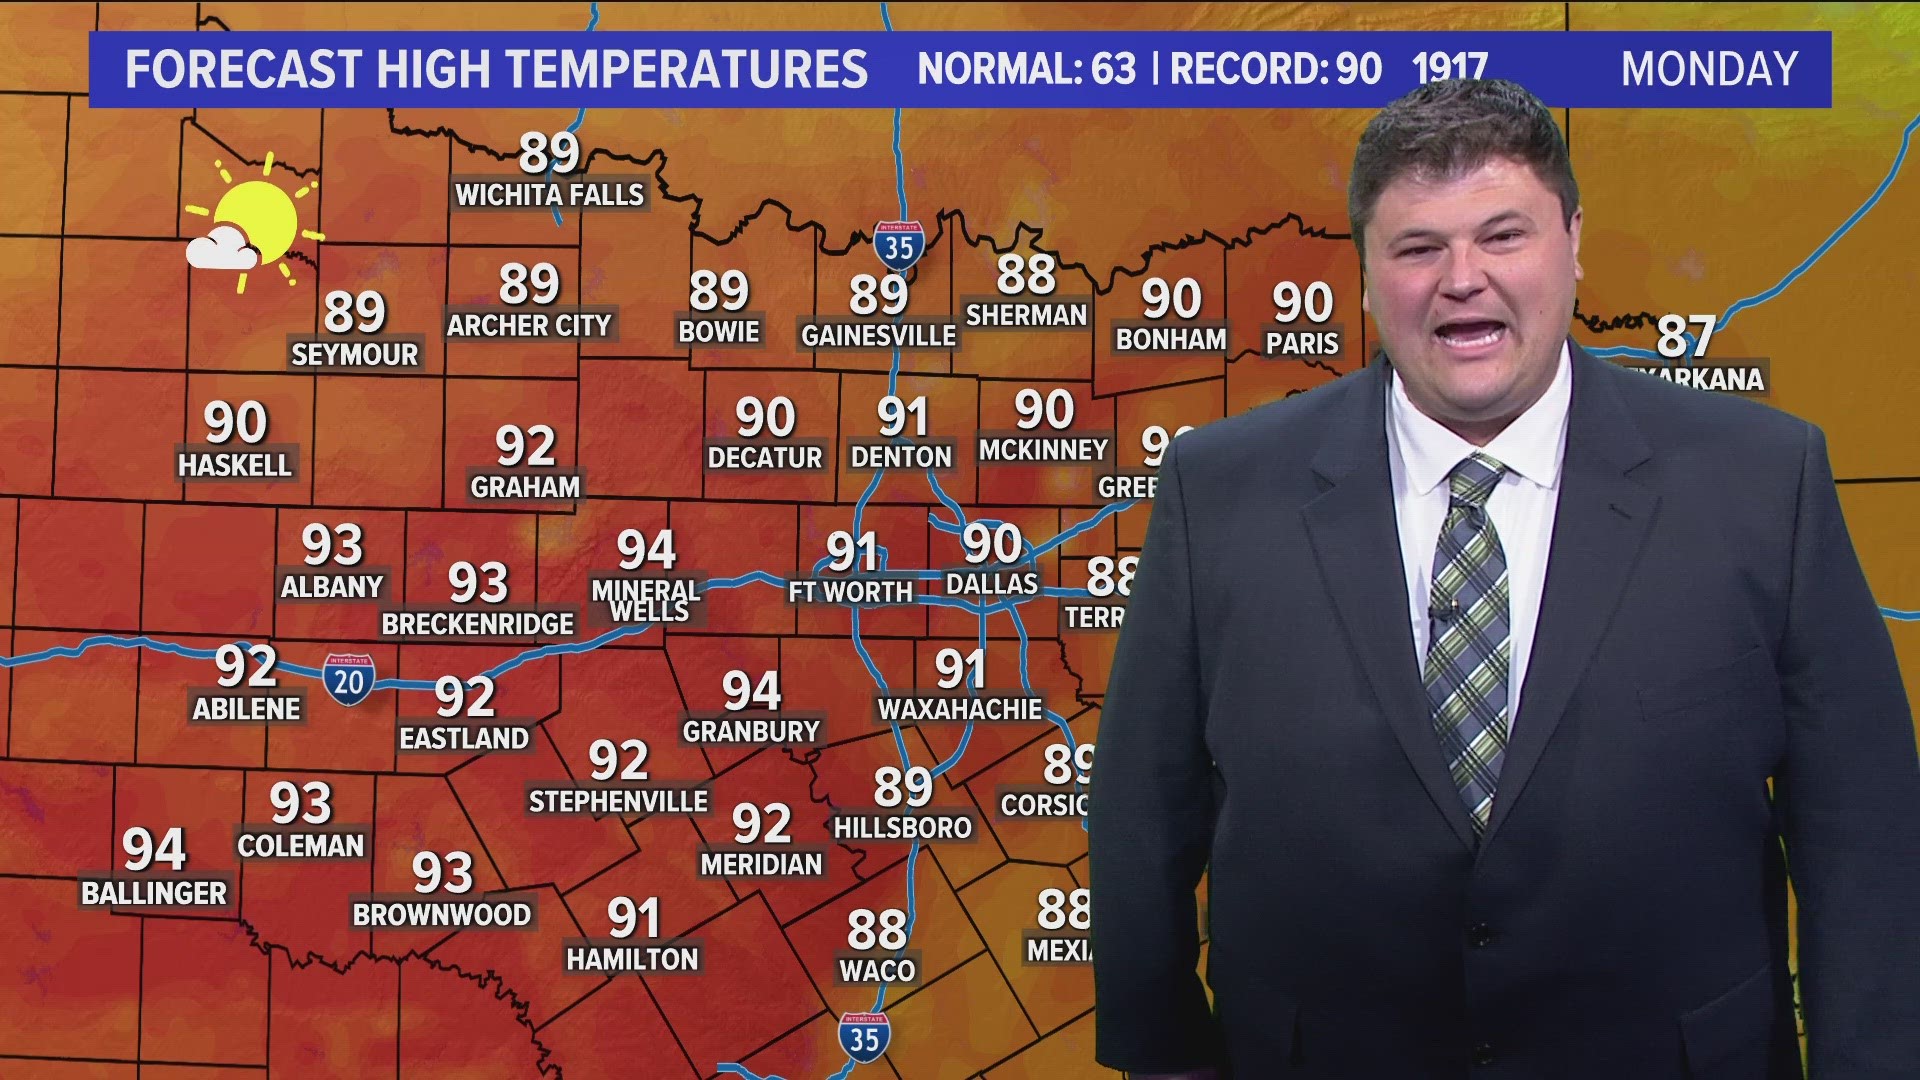 Some parts of North Texas will see as high as 91 degrees on Monday.